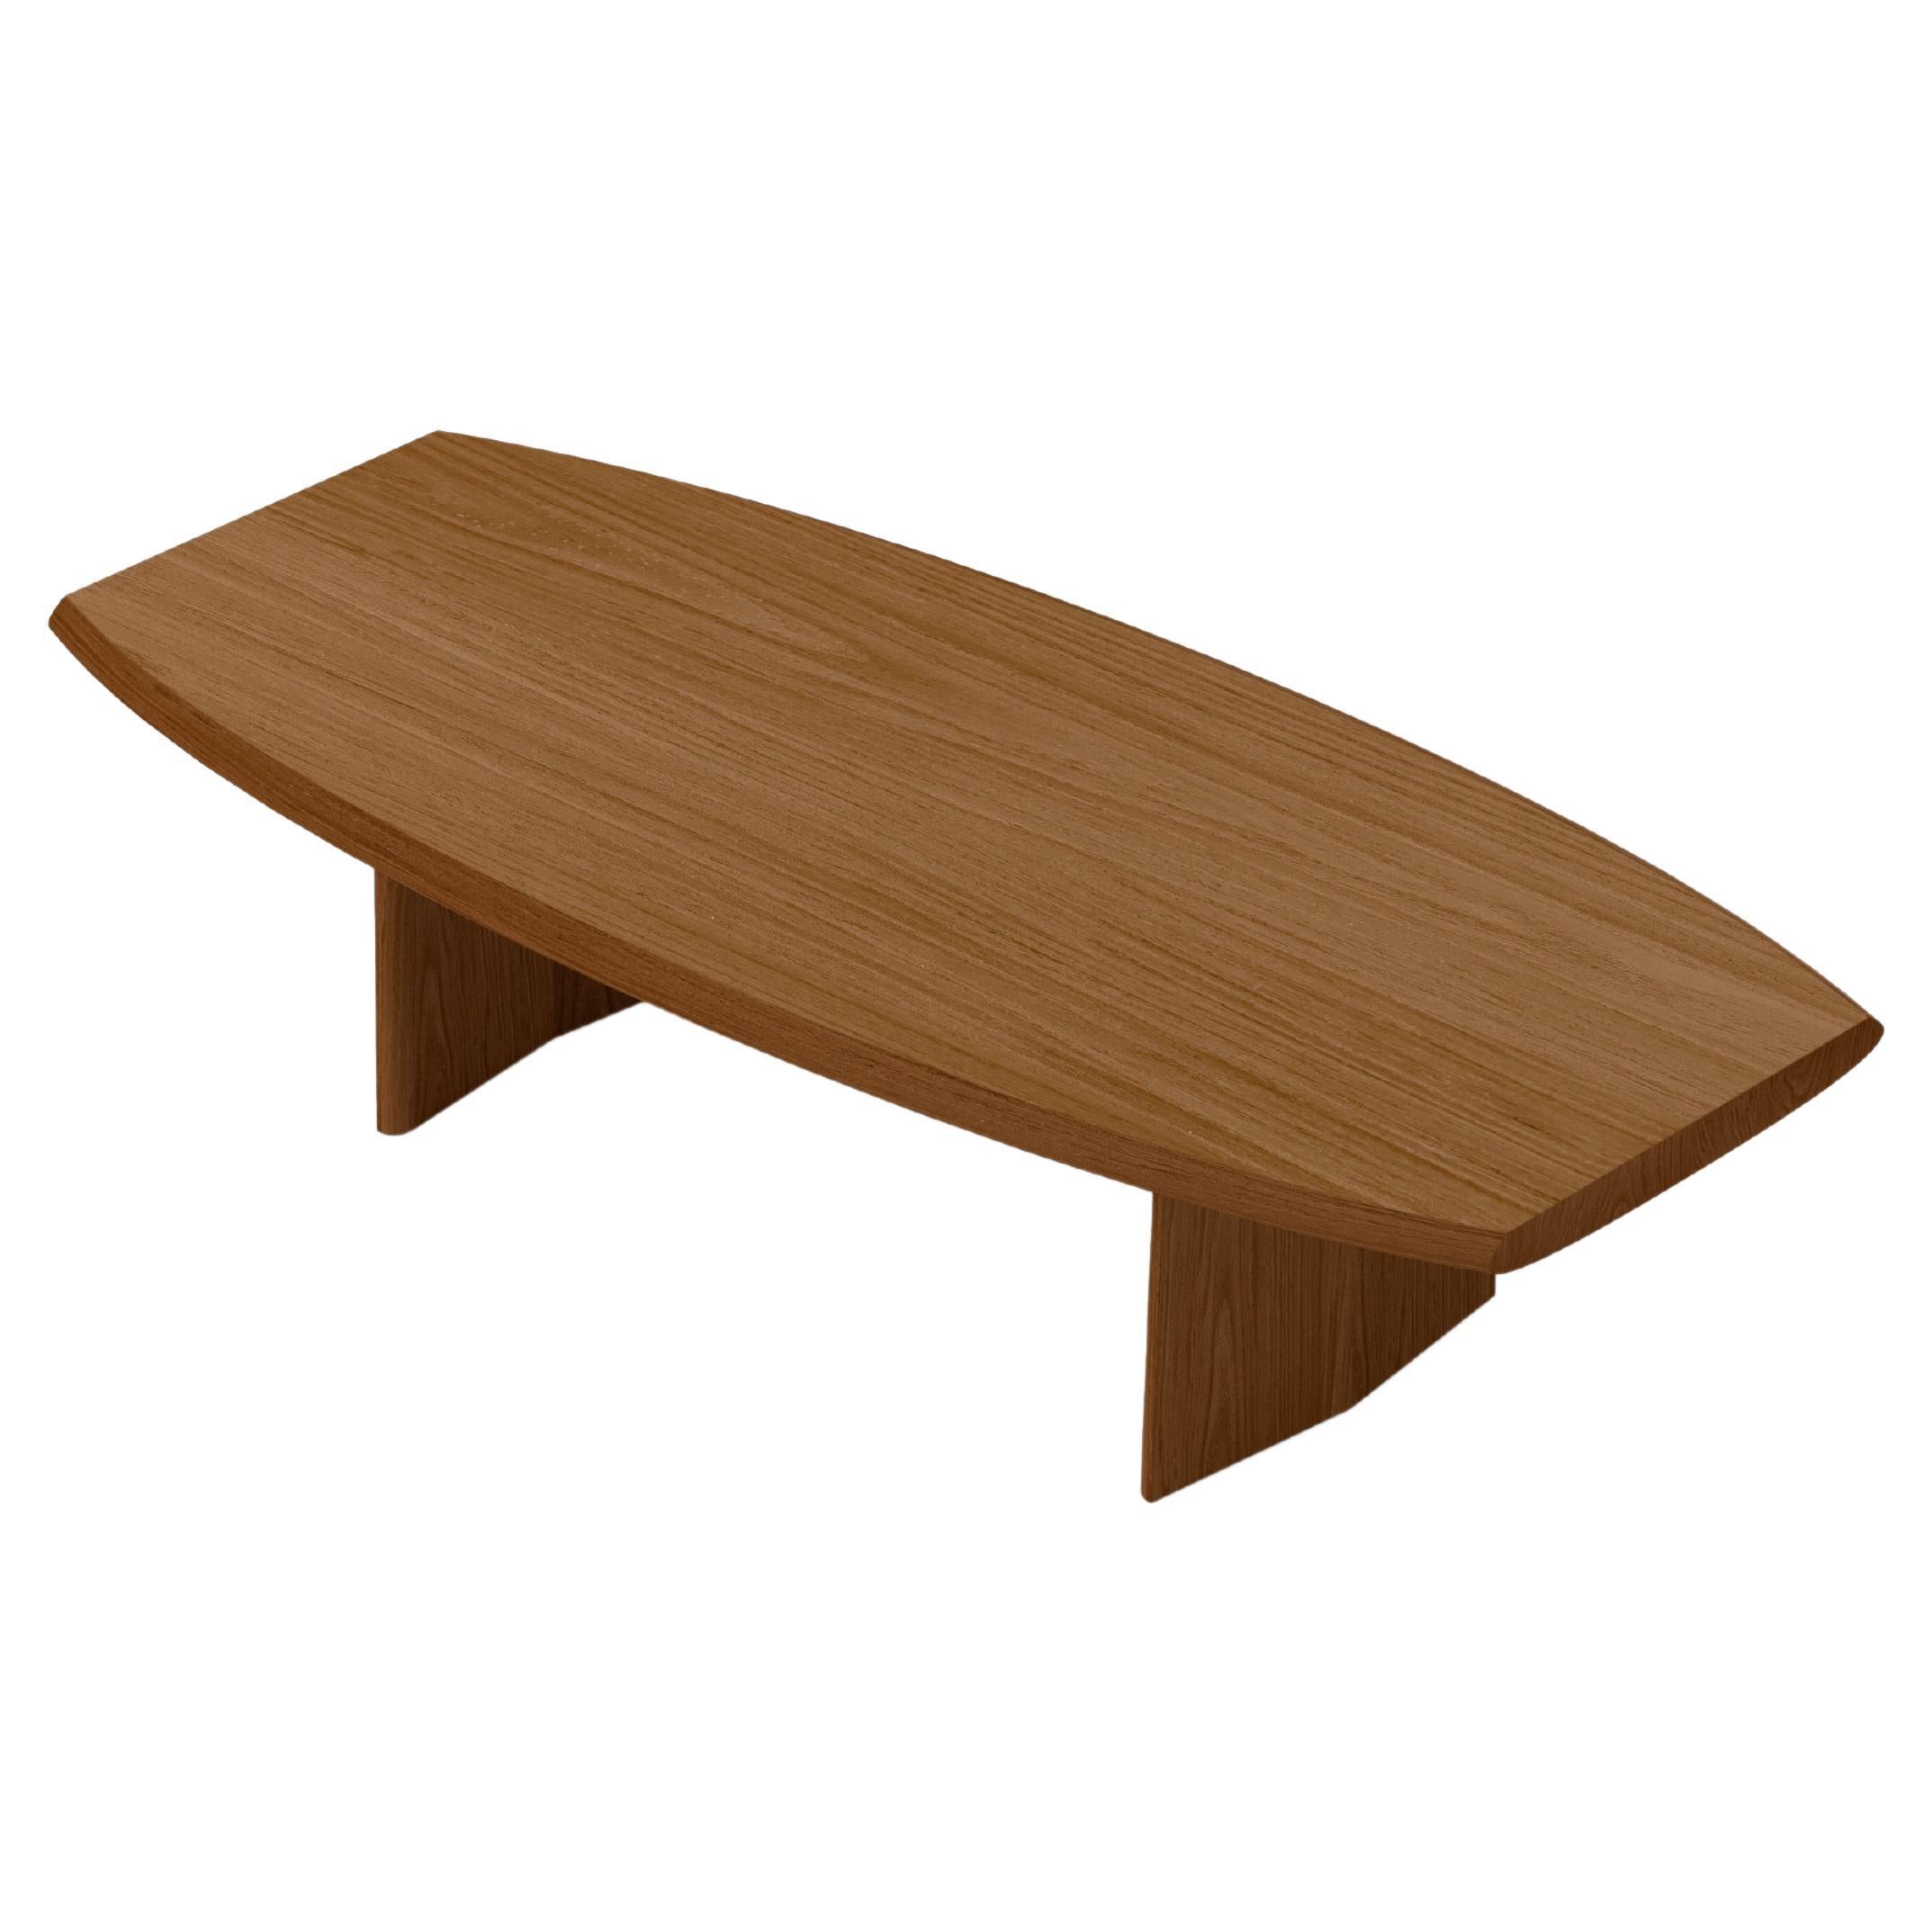 Peana Coffee Table, Bench in Red Tinted Solid Wood Finish by Joel Escalona For Sale